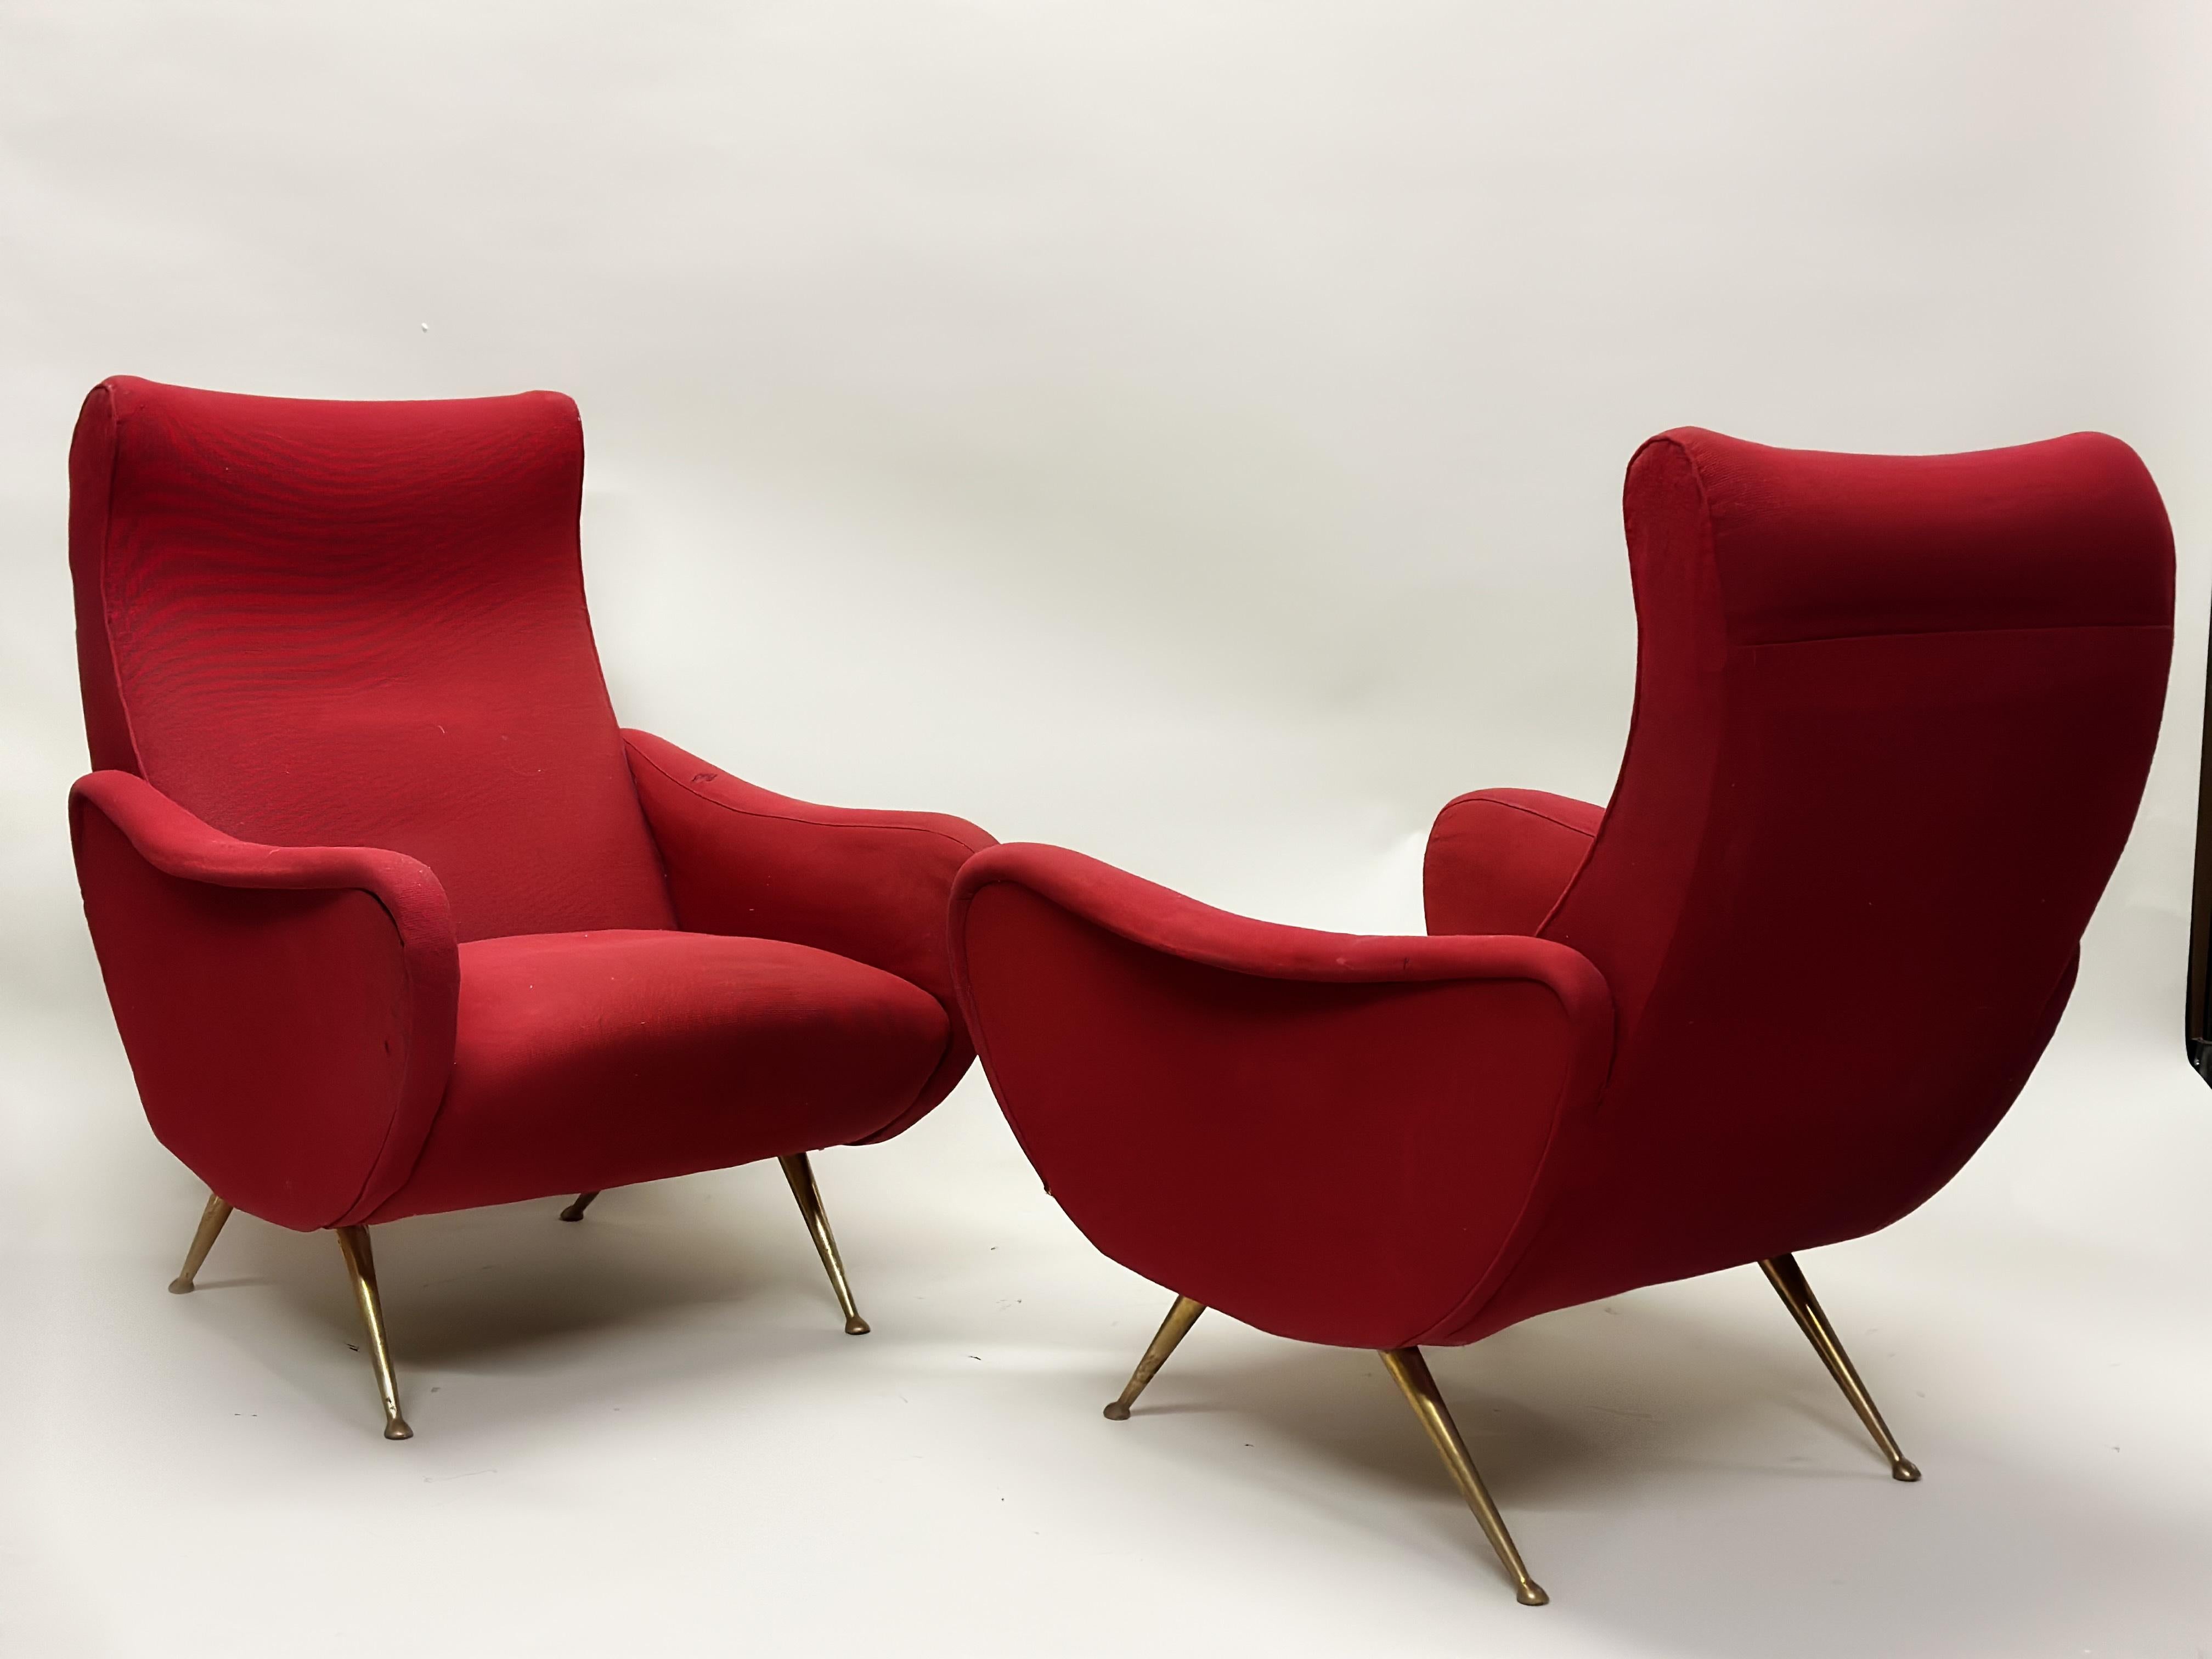 A classic pair of Italian Mid-Century Modern lounge chairs or Armchairs in the style of Marco Zanuso's 'Lady Chairs'. The chairs are set upon a set on boldly angled and tapered solid brass legs and sabots. The overall form is sensuous and organic